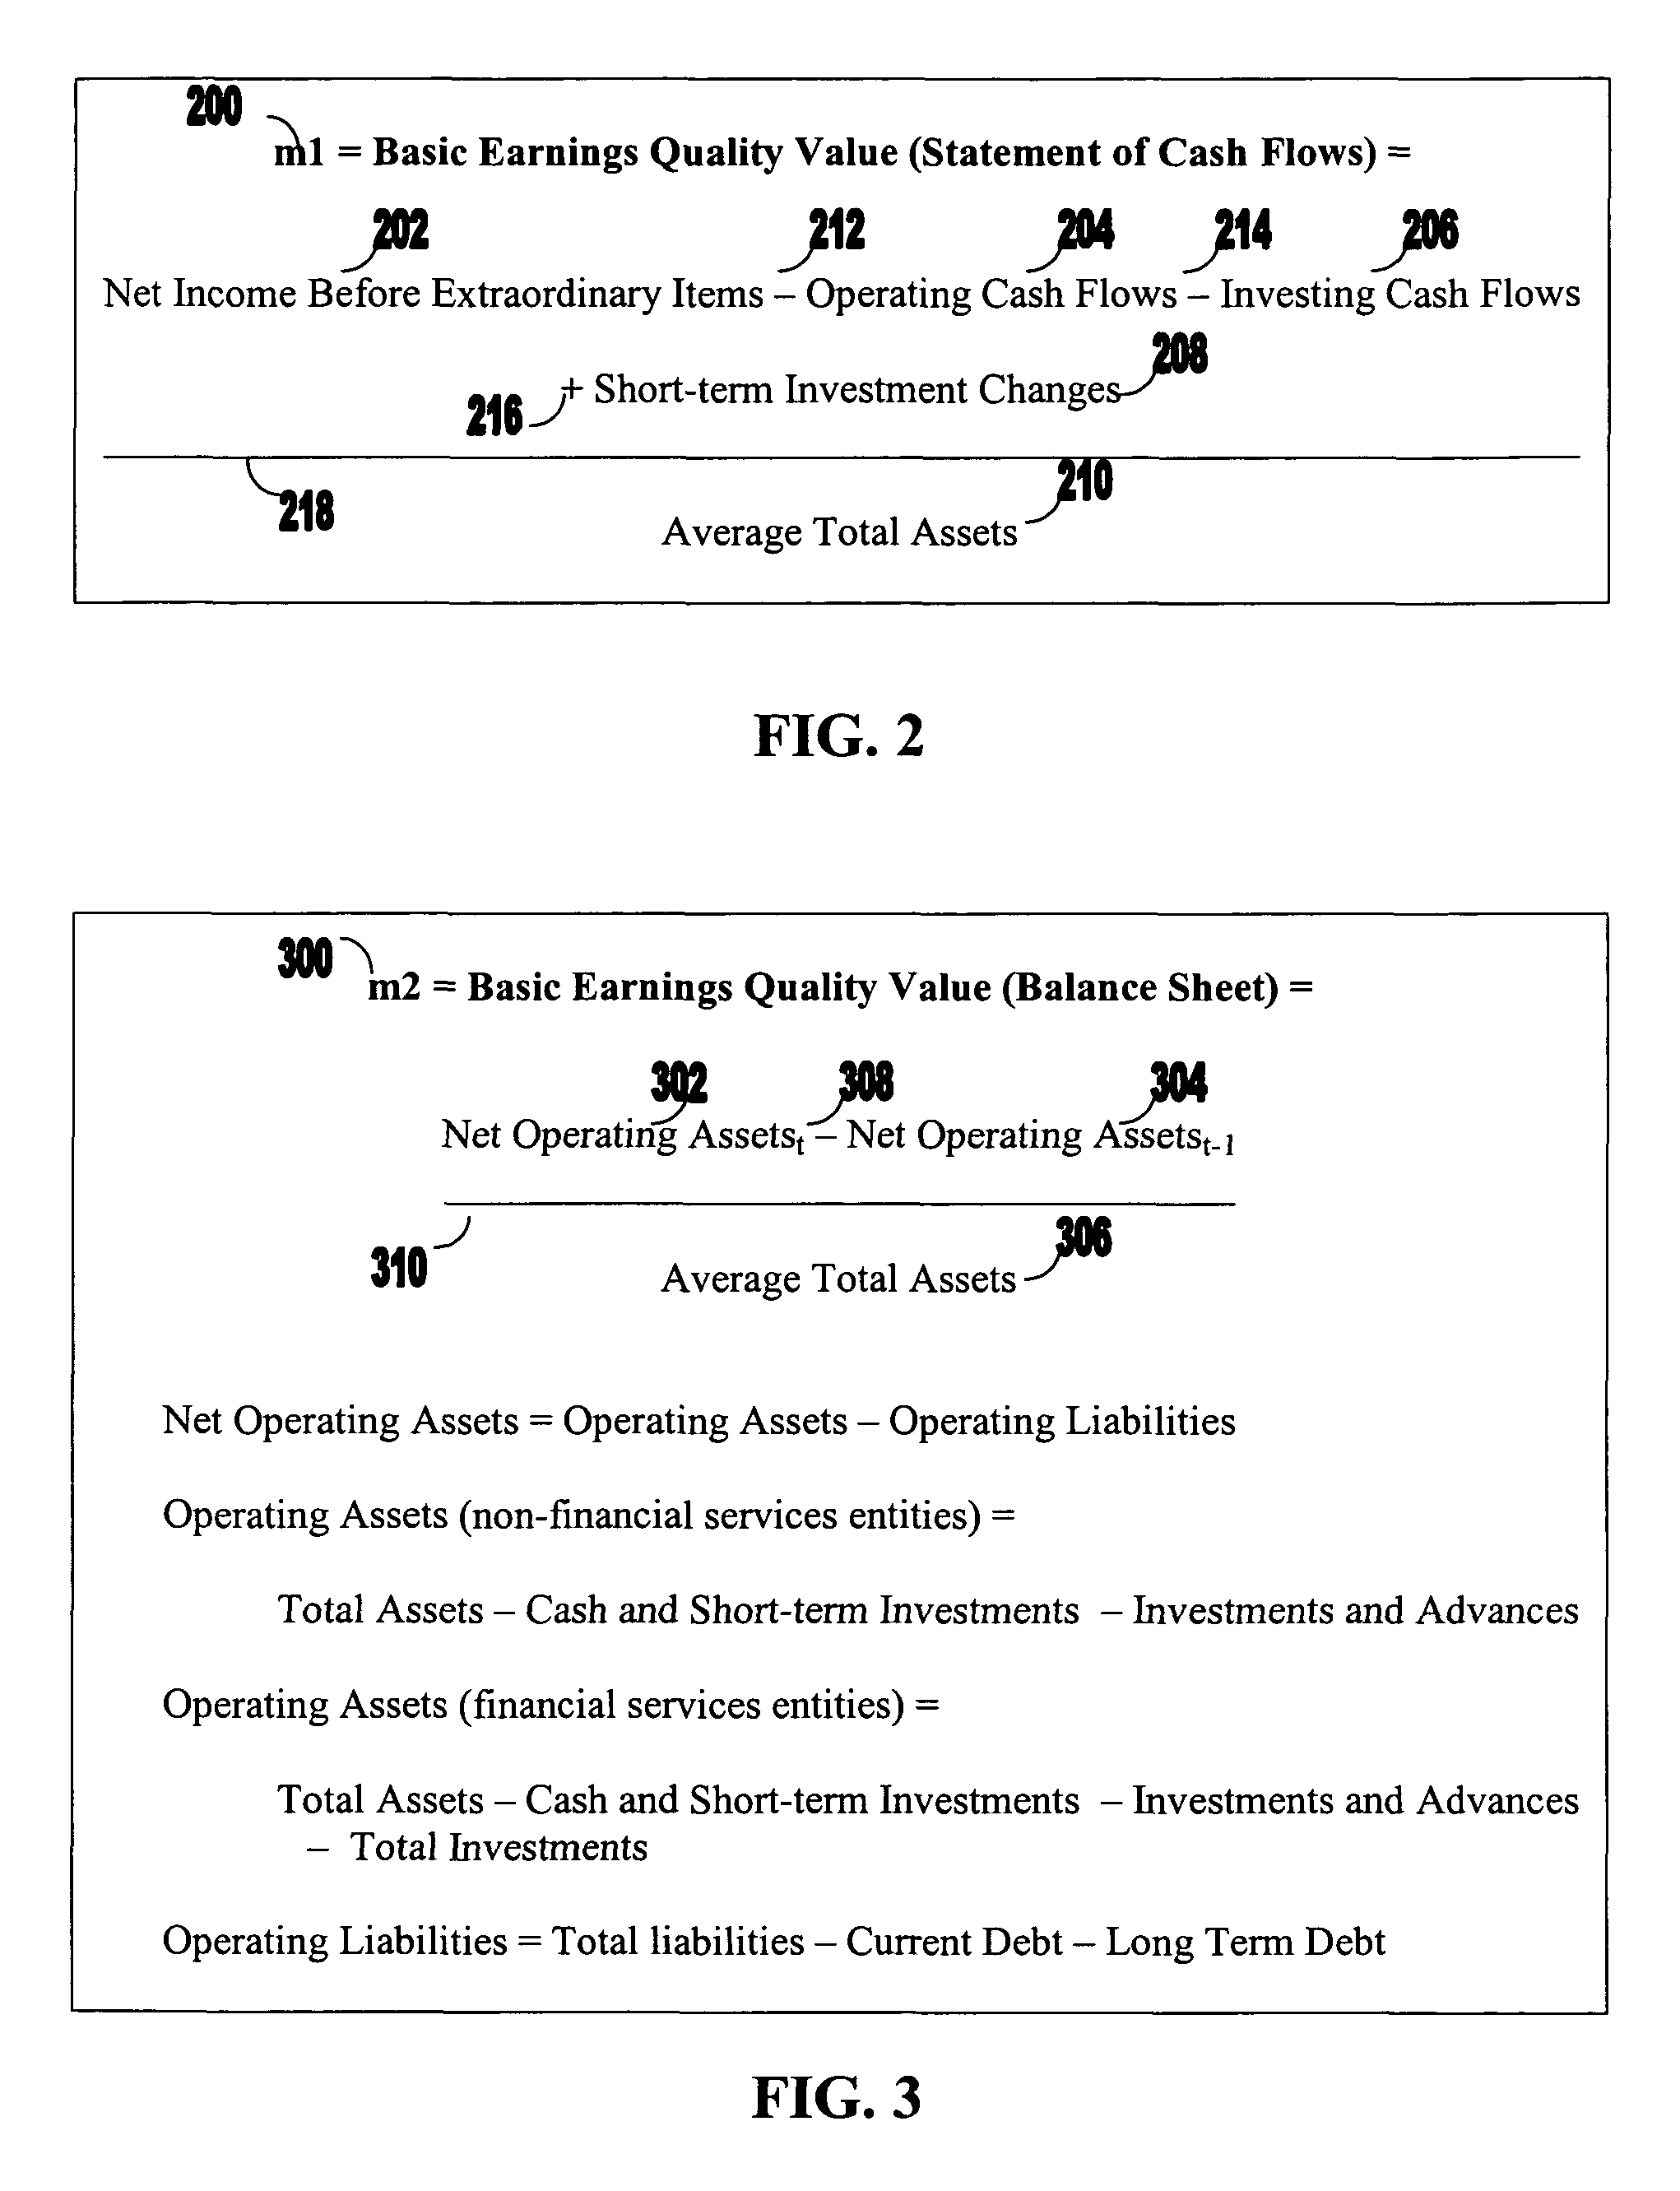 Methods and systems for classifying entities according to metrics of earnings quality